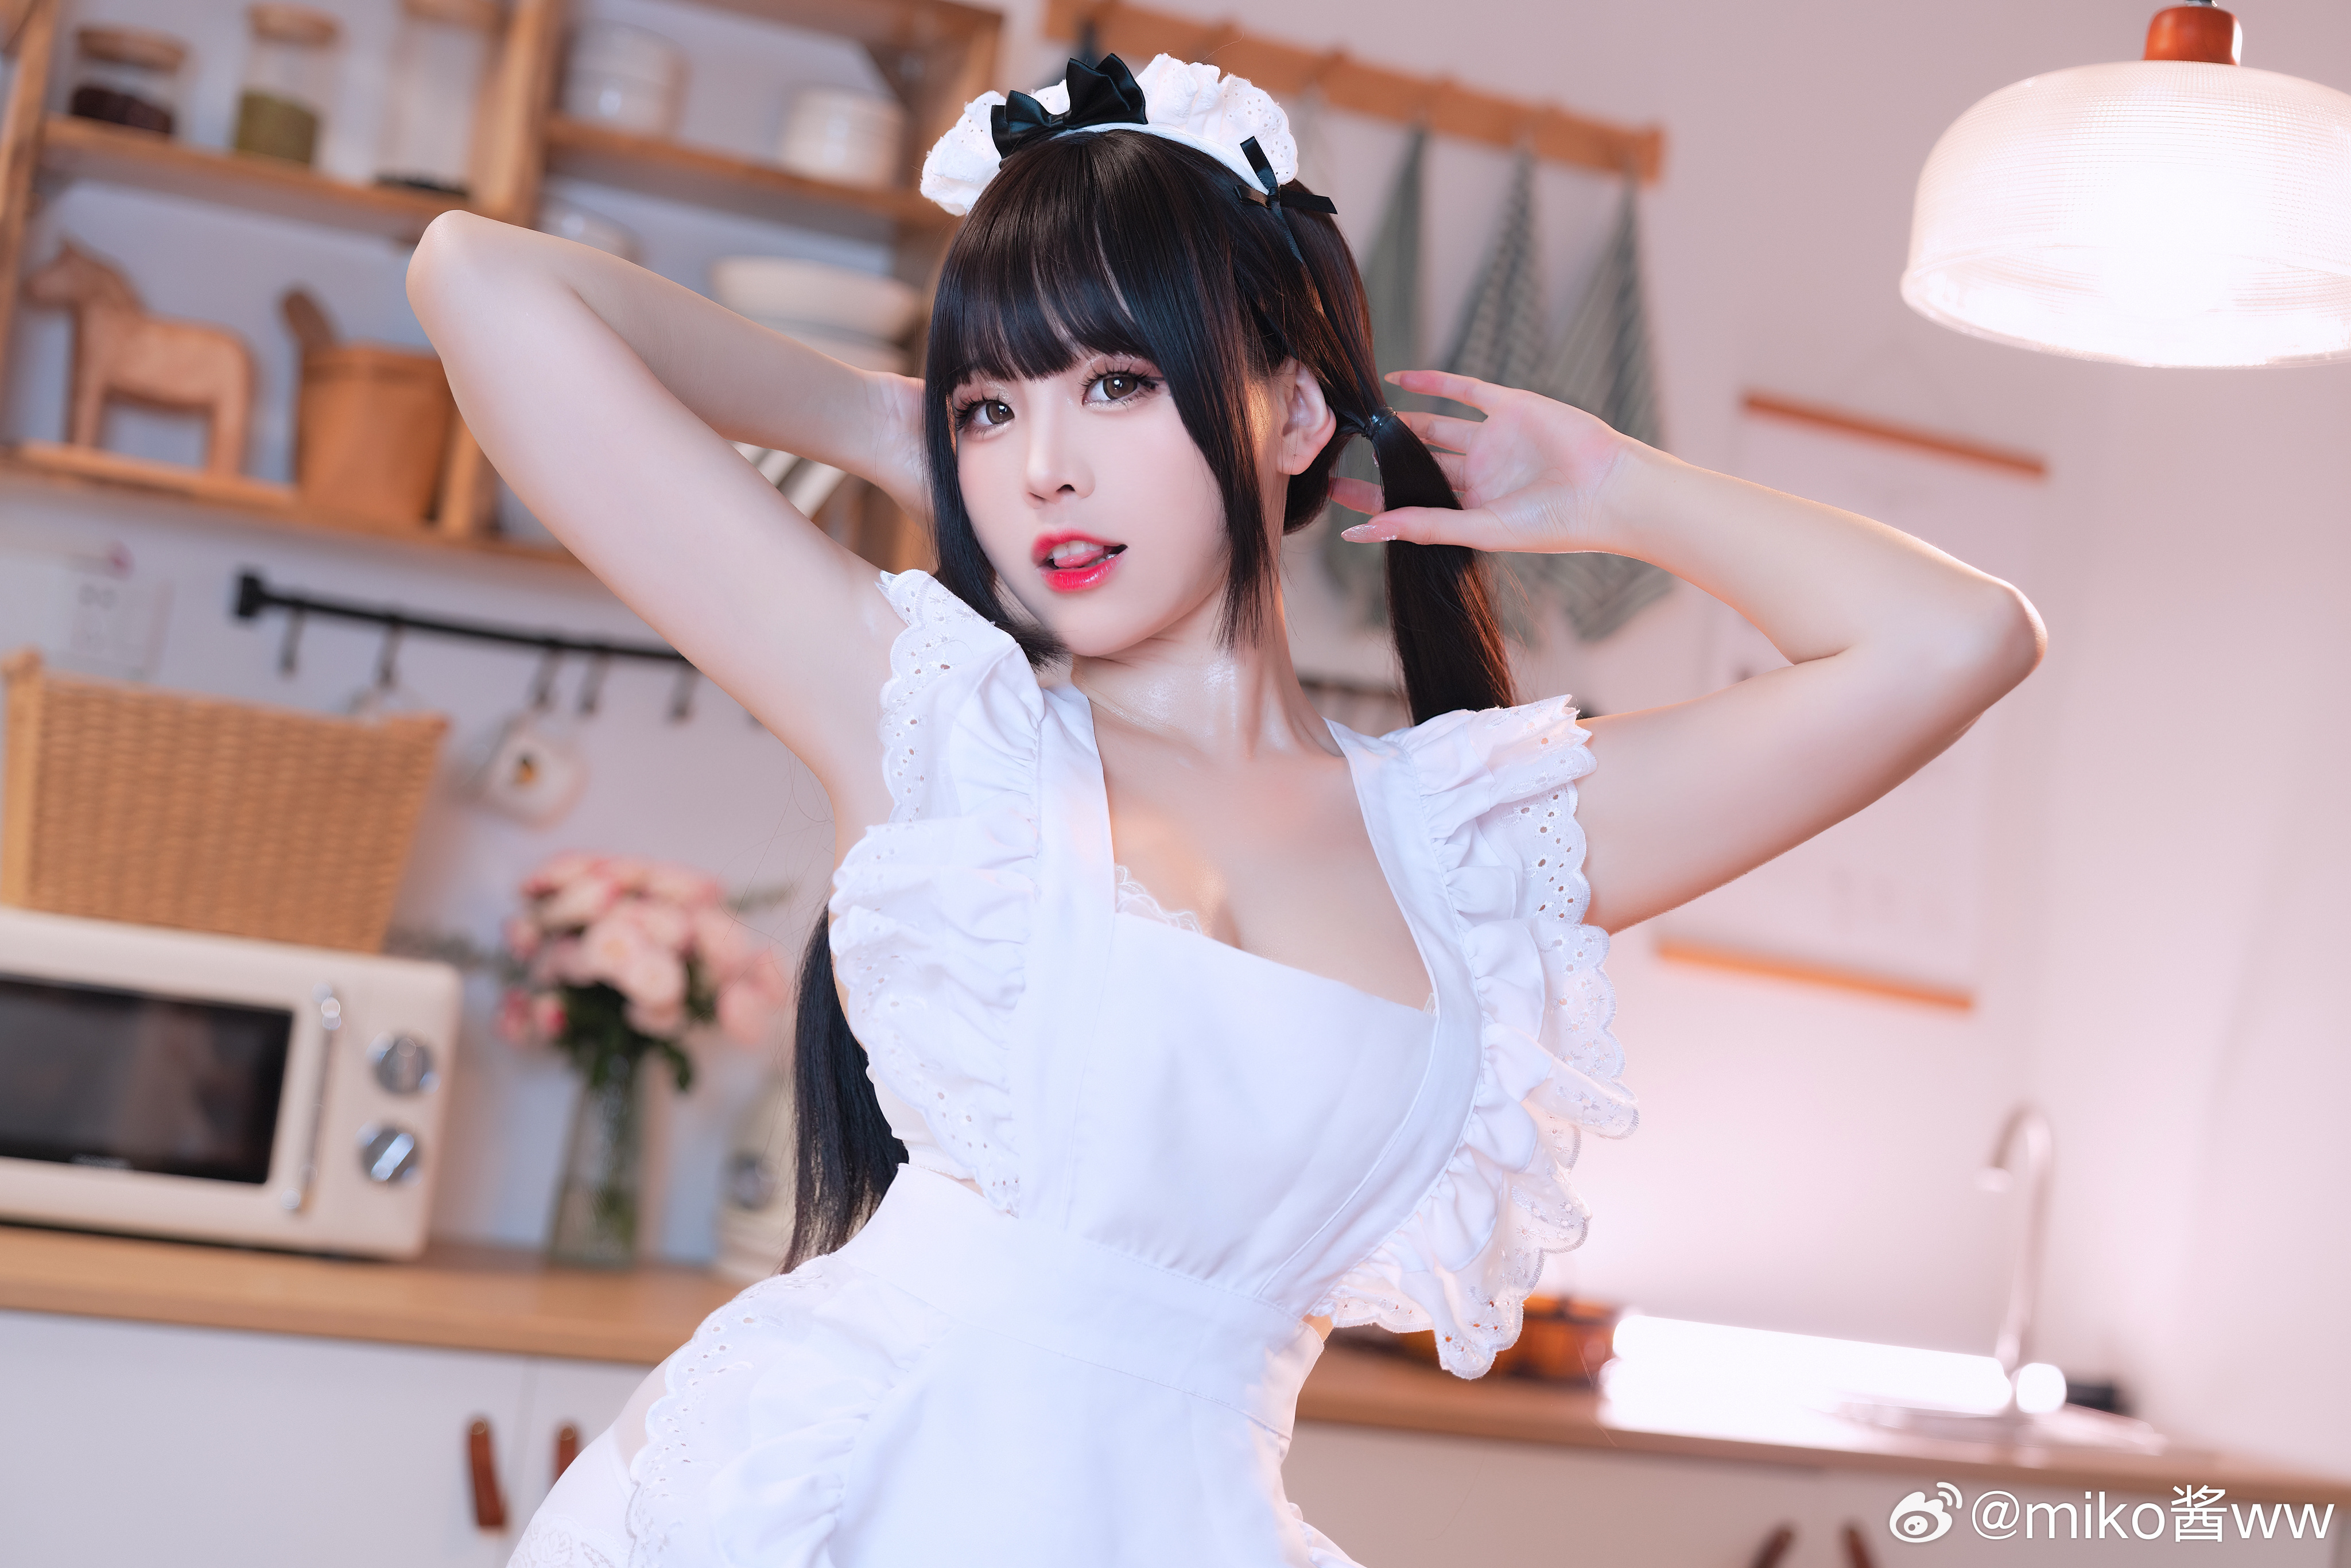 Cosplay Women Model Asian Brunette Brown Eyes Red Lipstick Parted Lips Maid Outfit White Apron Apron 4096x2732